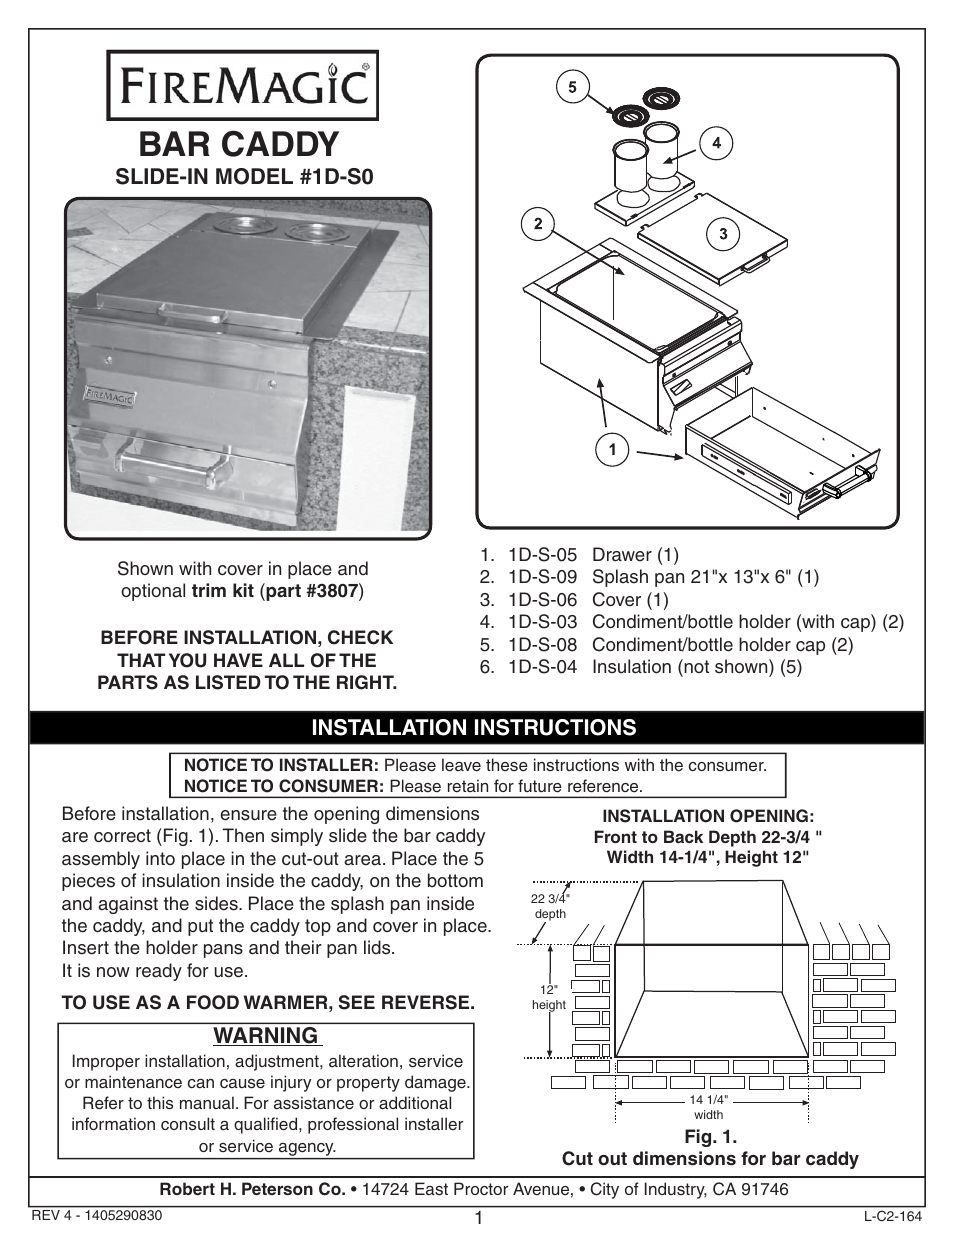 Fire Magic 1D-S0 Bar Caddy User Manual | 2 pages